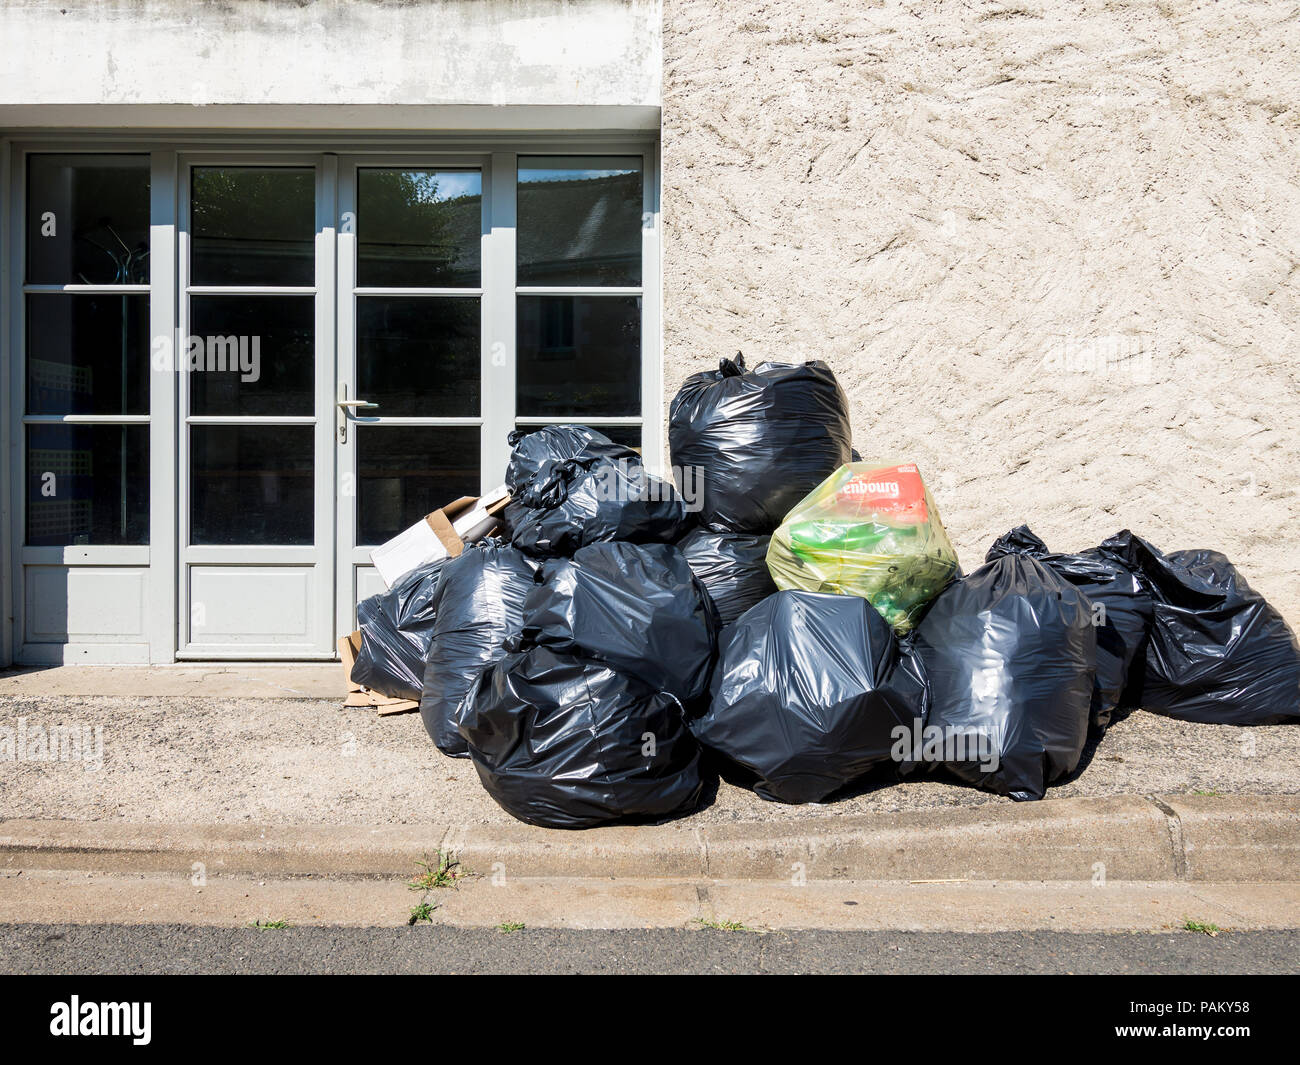 Black bin bags awaiting collection, Abilly, Indre-et-Loire, France. Stock Photo